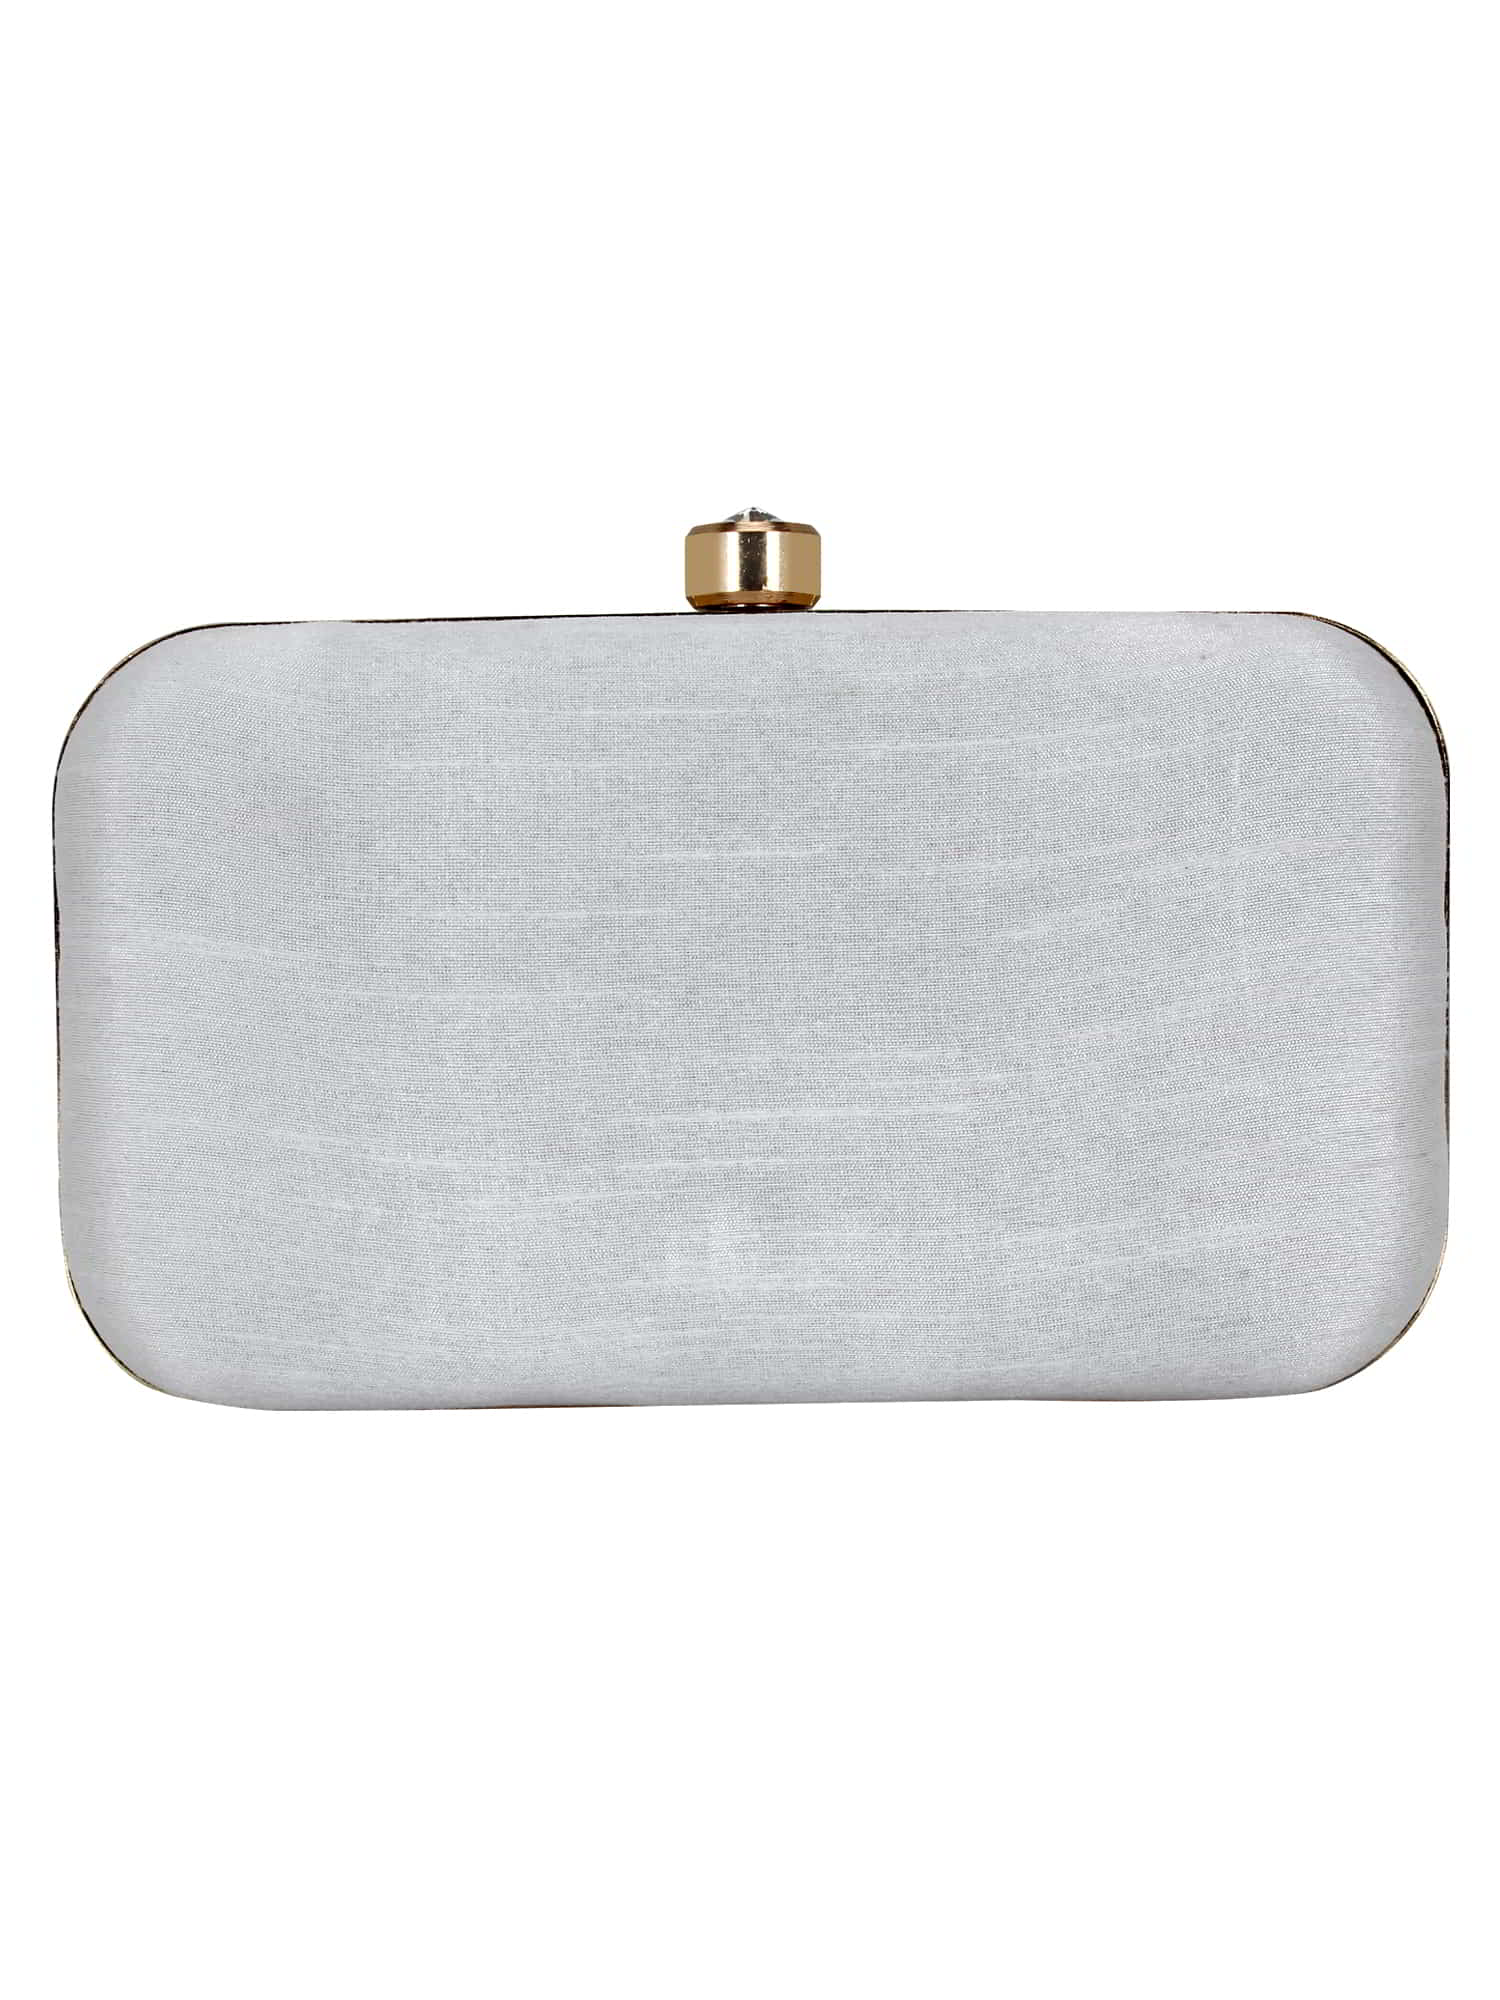 Adorn Embroidered & Embelished Party Clutch